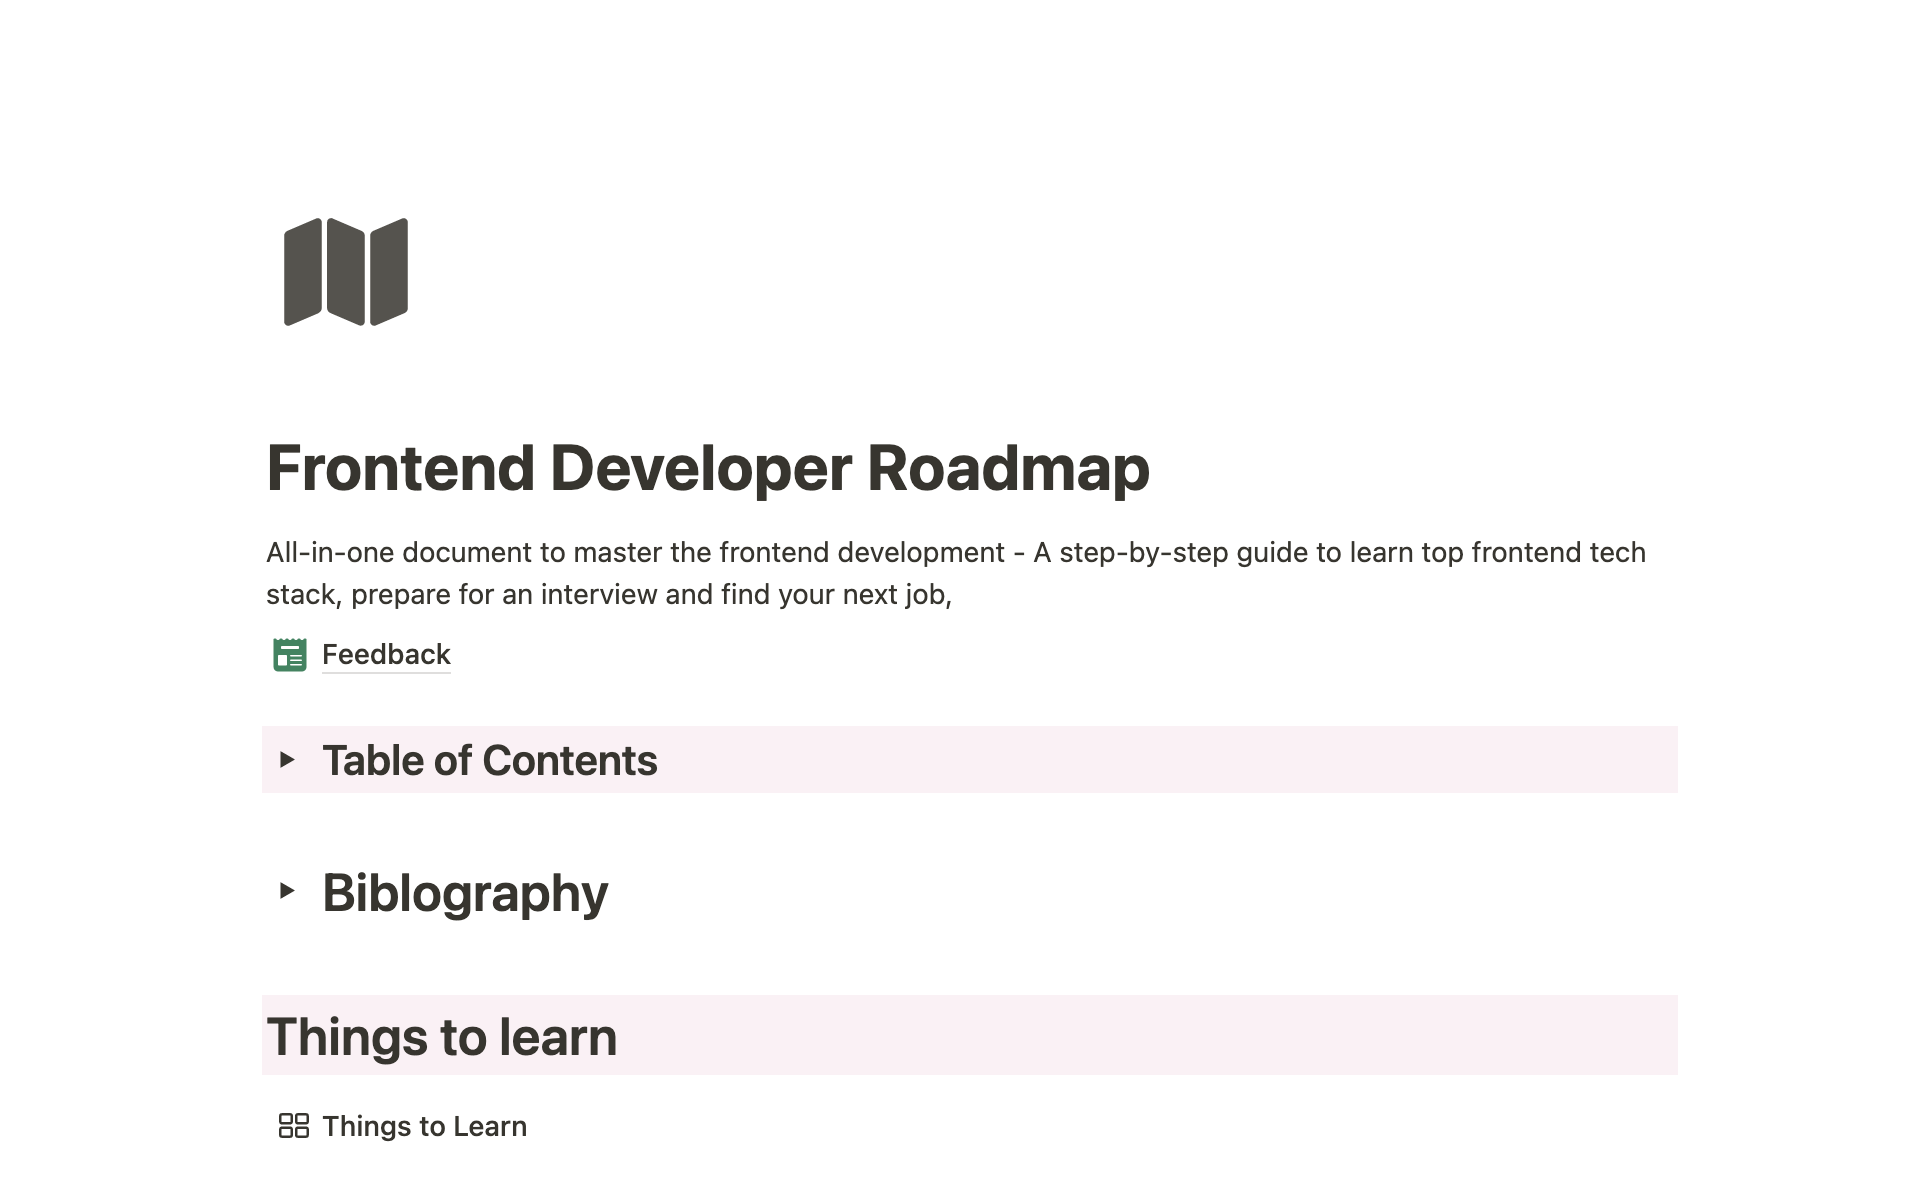 Provide proper roadmap to learn top tech stack and languages with top notch resources to master frontend development.